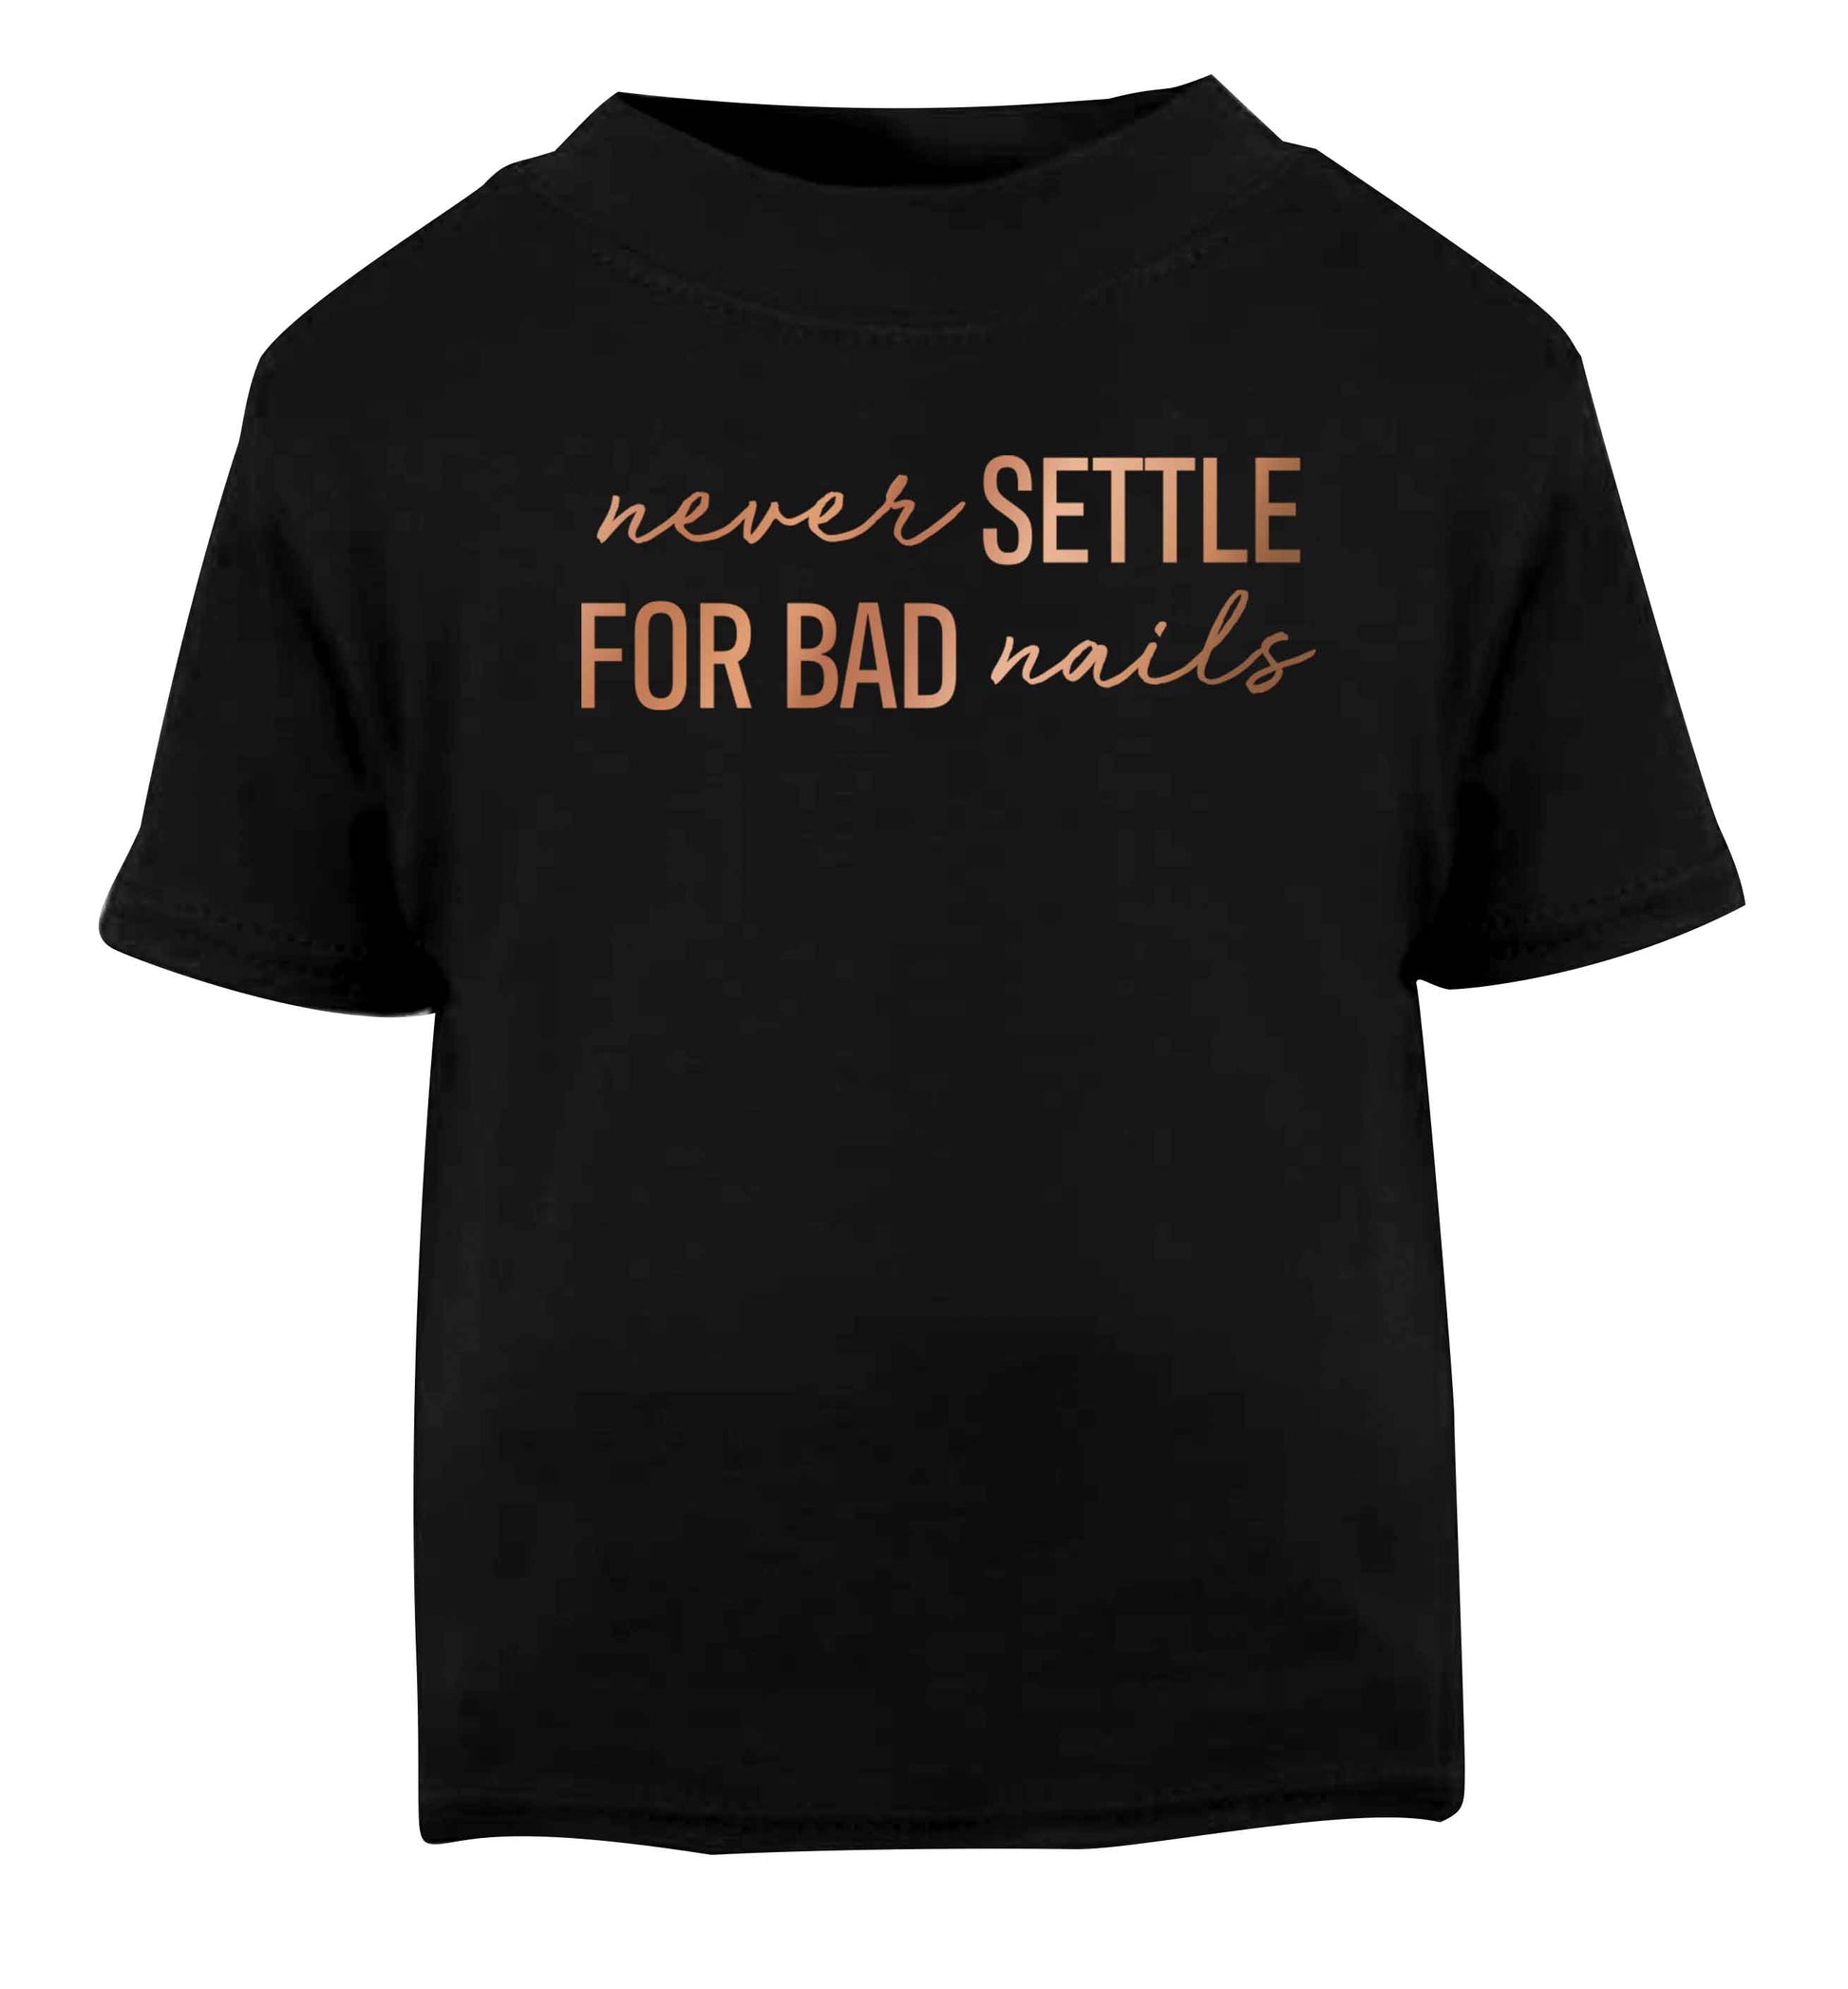 Never settle for bad nails - rose gold Black baby toddler Tshirt 2 years